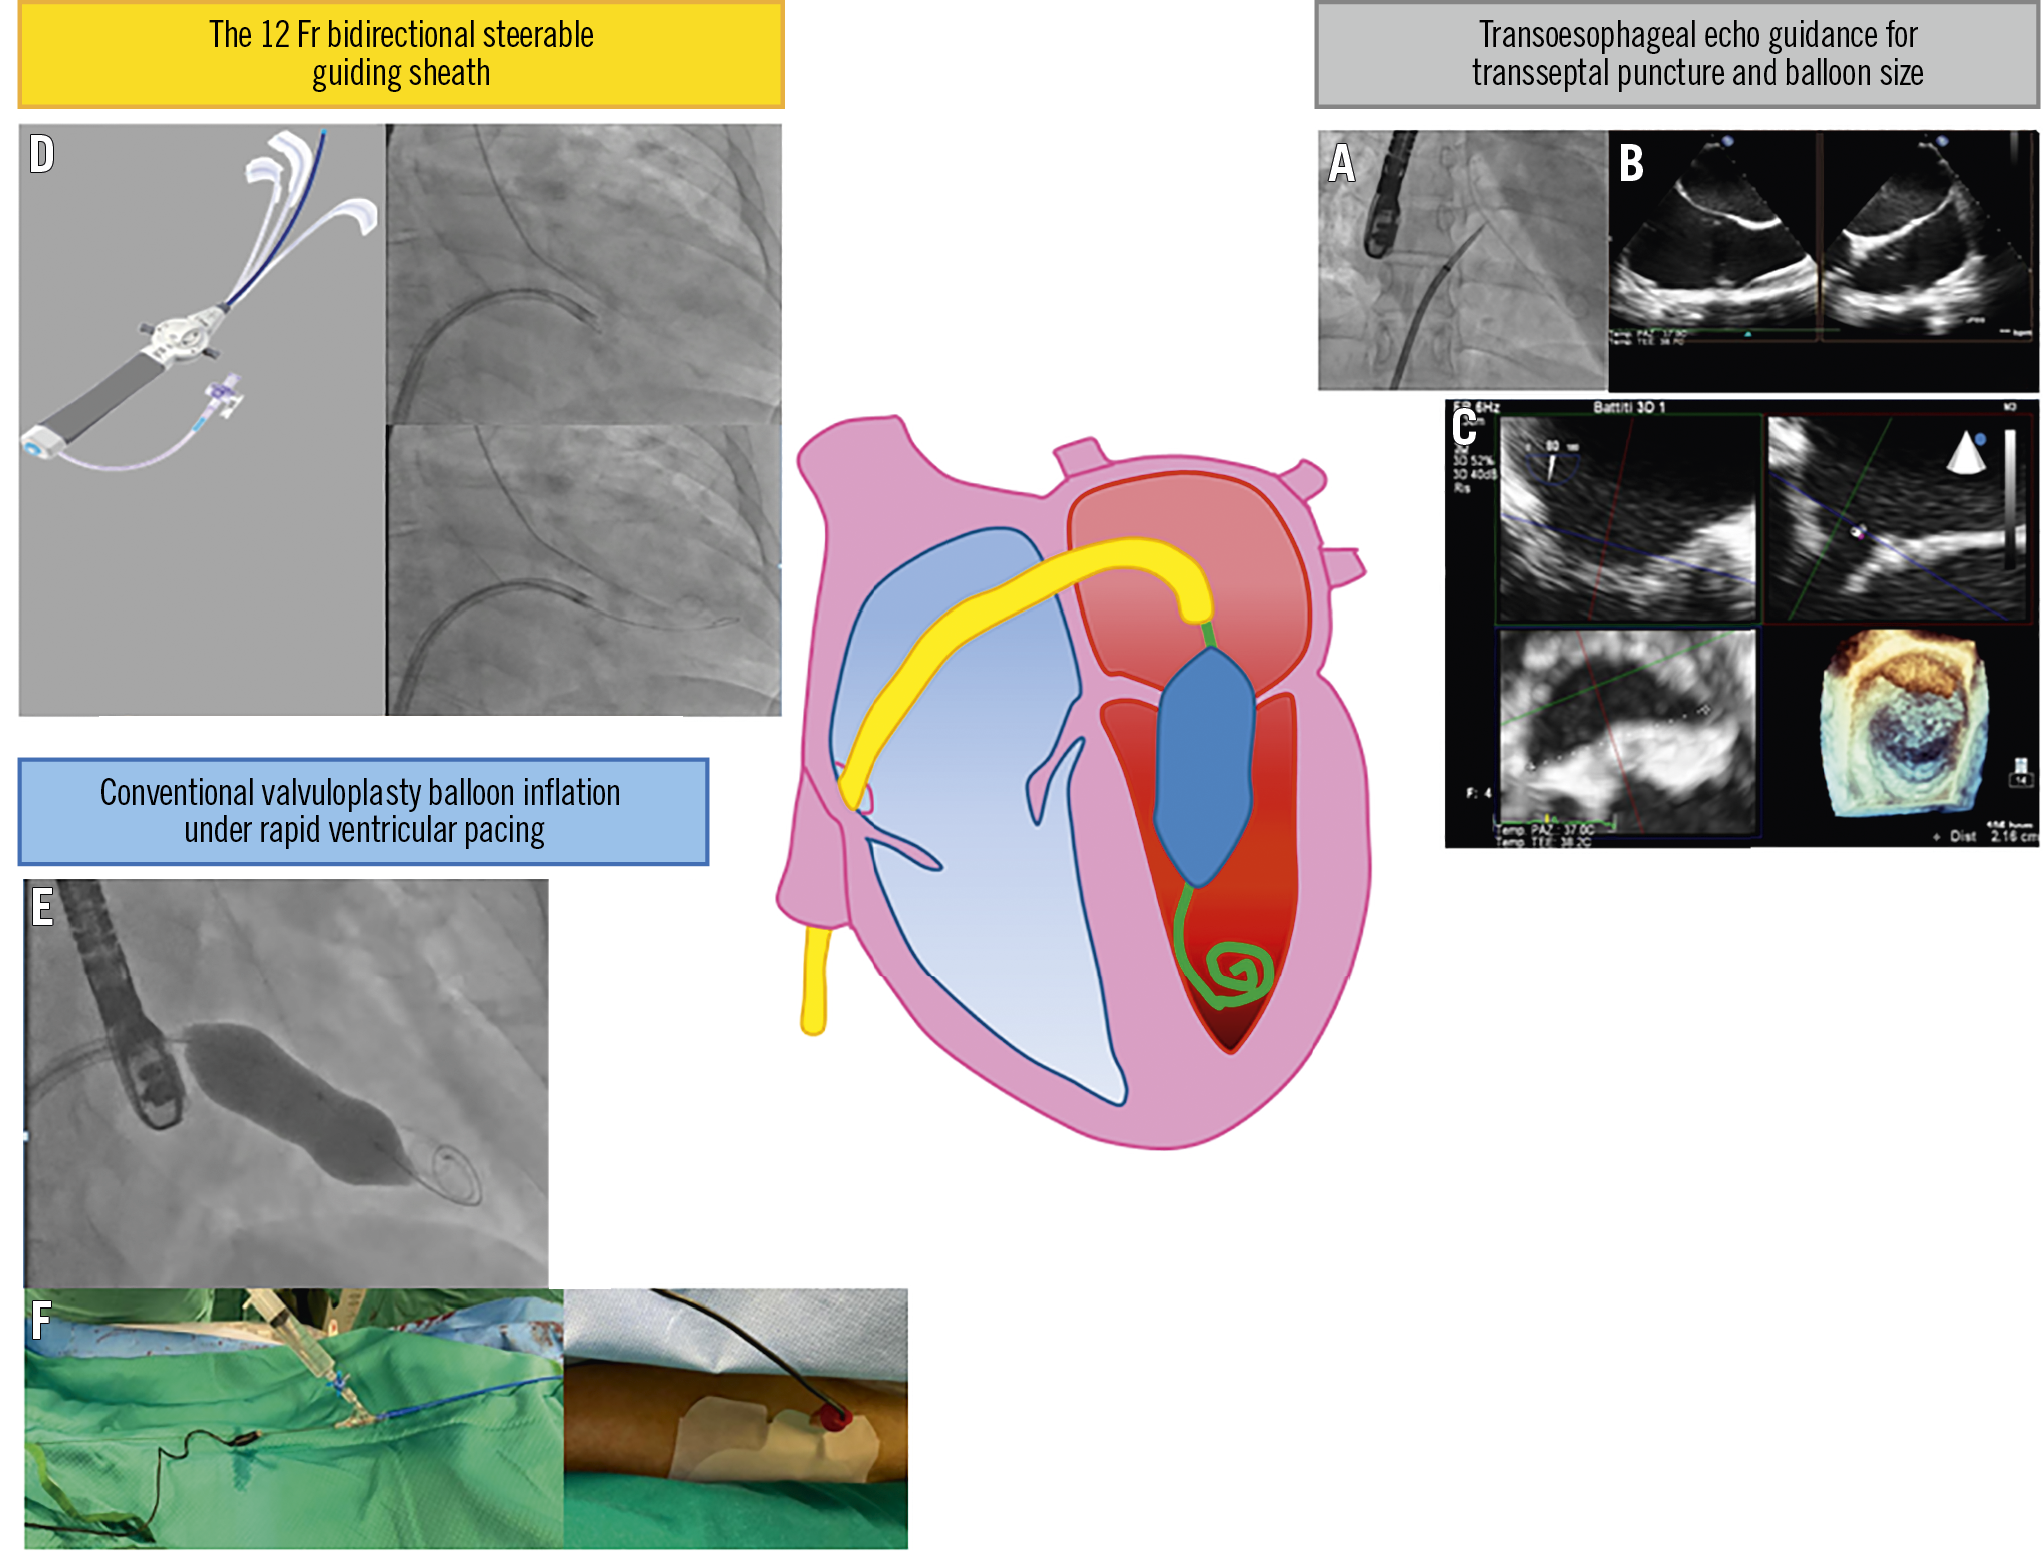 Figure 1. Strengths of the novel technique for percutaneous mitral valvuloplasty.